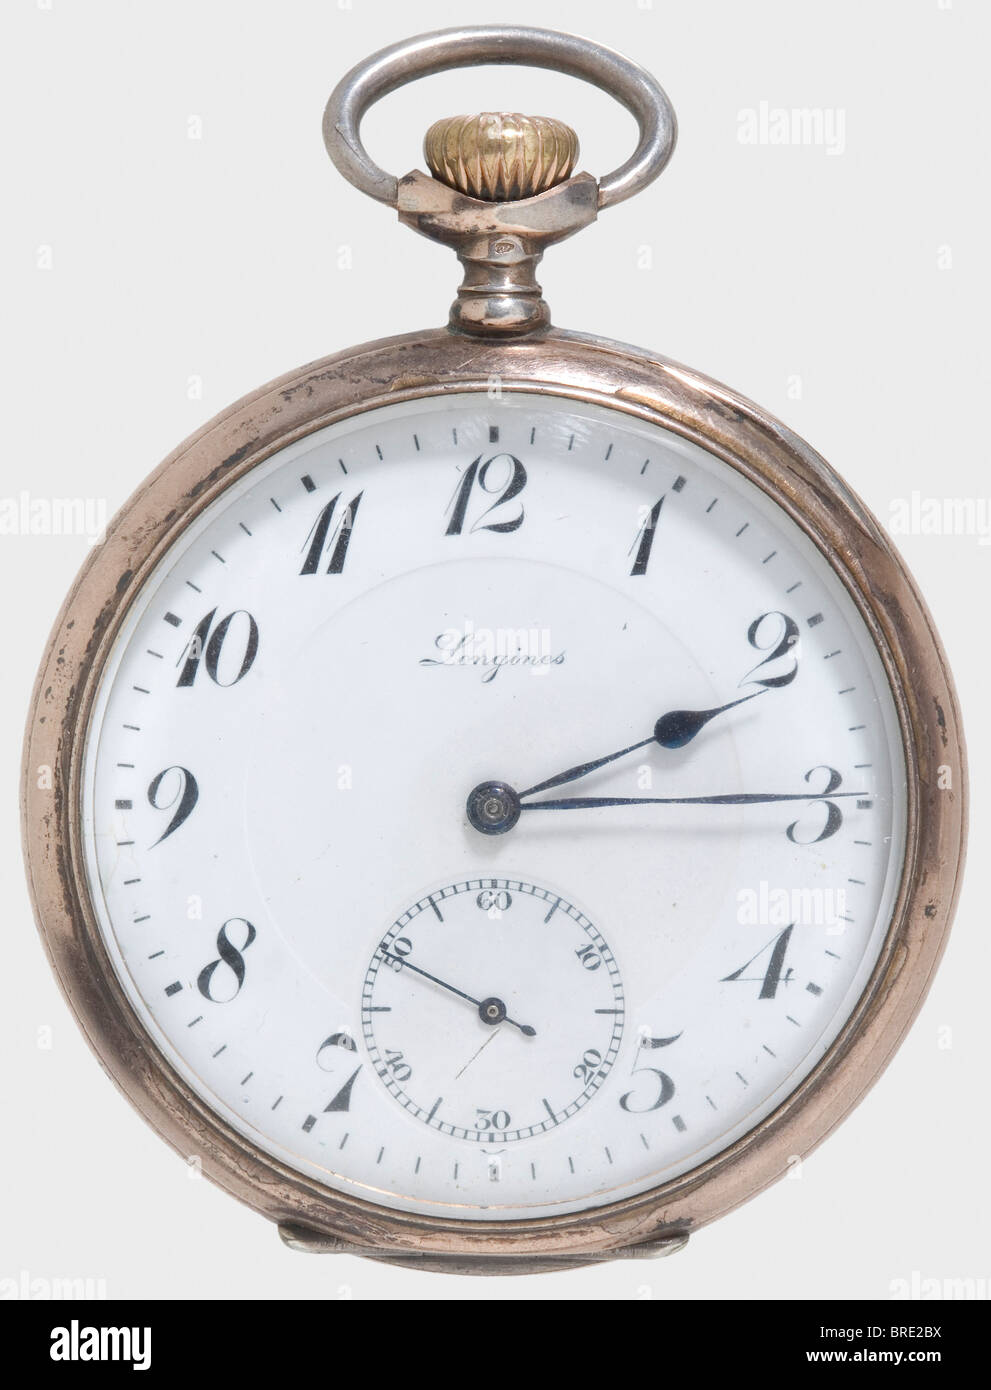 Kaiser Wilhelm II, a presentation watch for 25 years of service A silver pocket watch made by 'Longines' with rose gold-plated rims. White enamel dial with Arabic numerals, small second at the '6' position, and blued steel hands. The lid bears a 'W' cipher beneath an imperial crown and is engraved on the inside with: 'Für 25jährige treue Dienste dem Former August Müller - Kgl. Geschossfabrik in Spandau - 3.7.16'. (For 25 years loyal service, to the Moulder, August Müller - Royal Munitions Factory in Spandau - 3 July 1916). The outer lid bears a of the Kaiser in, Stock Photo